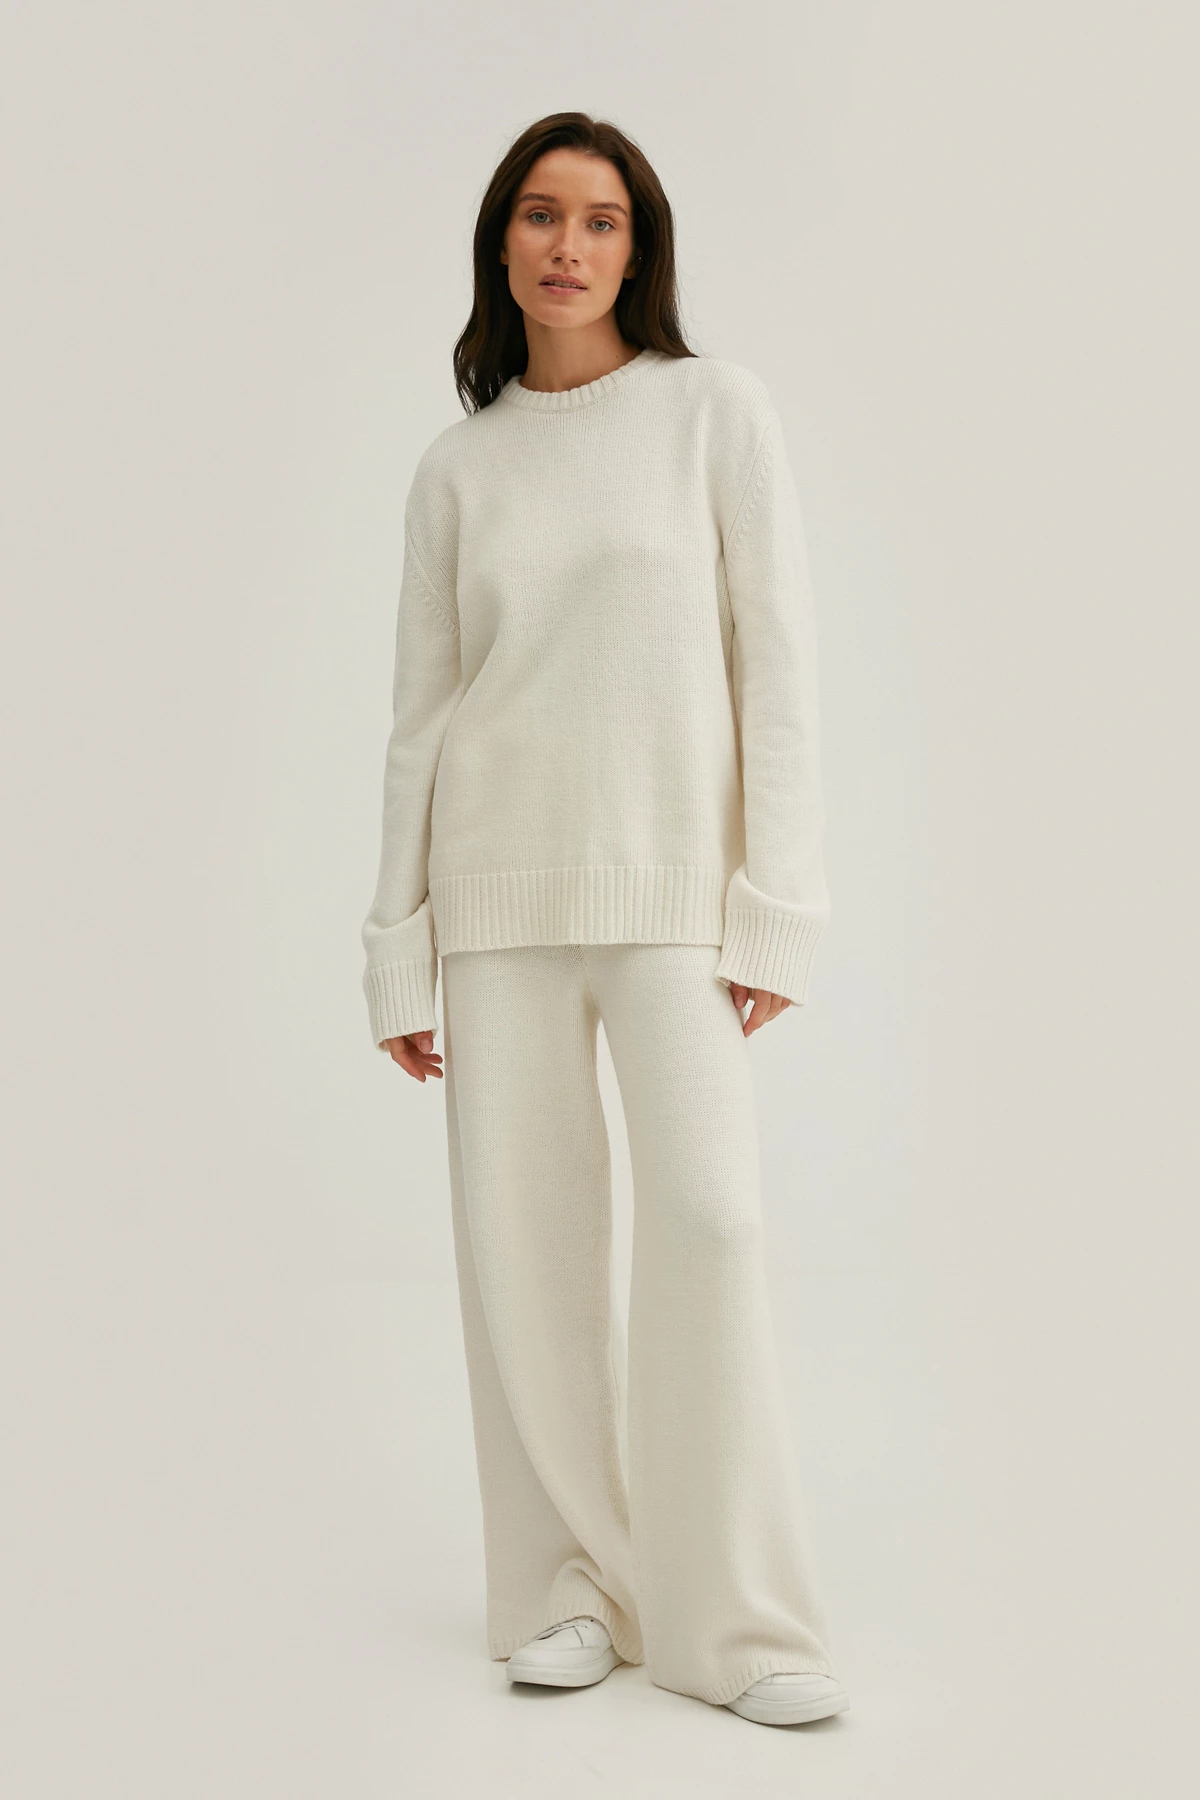 Milky knitted cropped pants with merino wool, photo 1